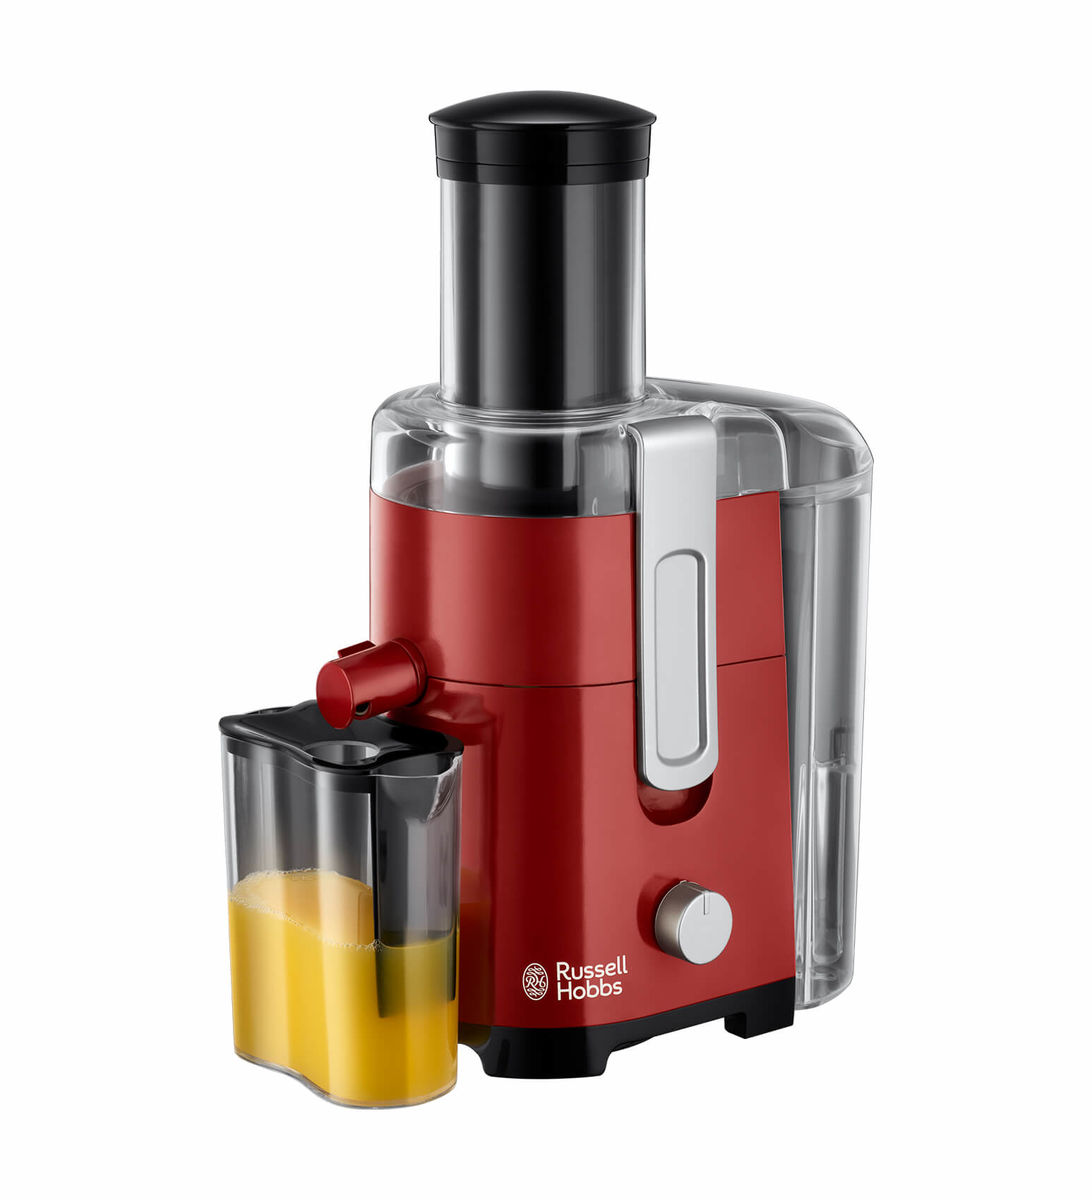 Image of Russell Hobbs Desire 24740-56 Entsafter rot bei nettoshop.ch